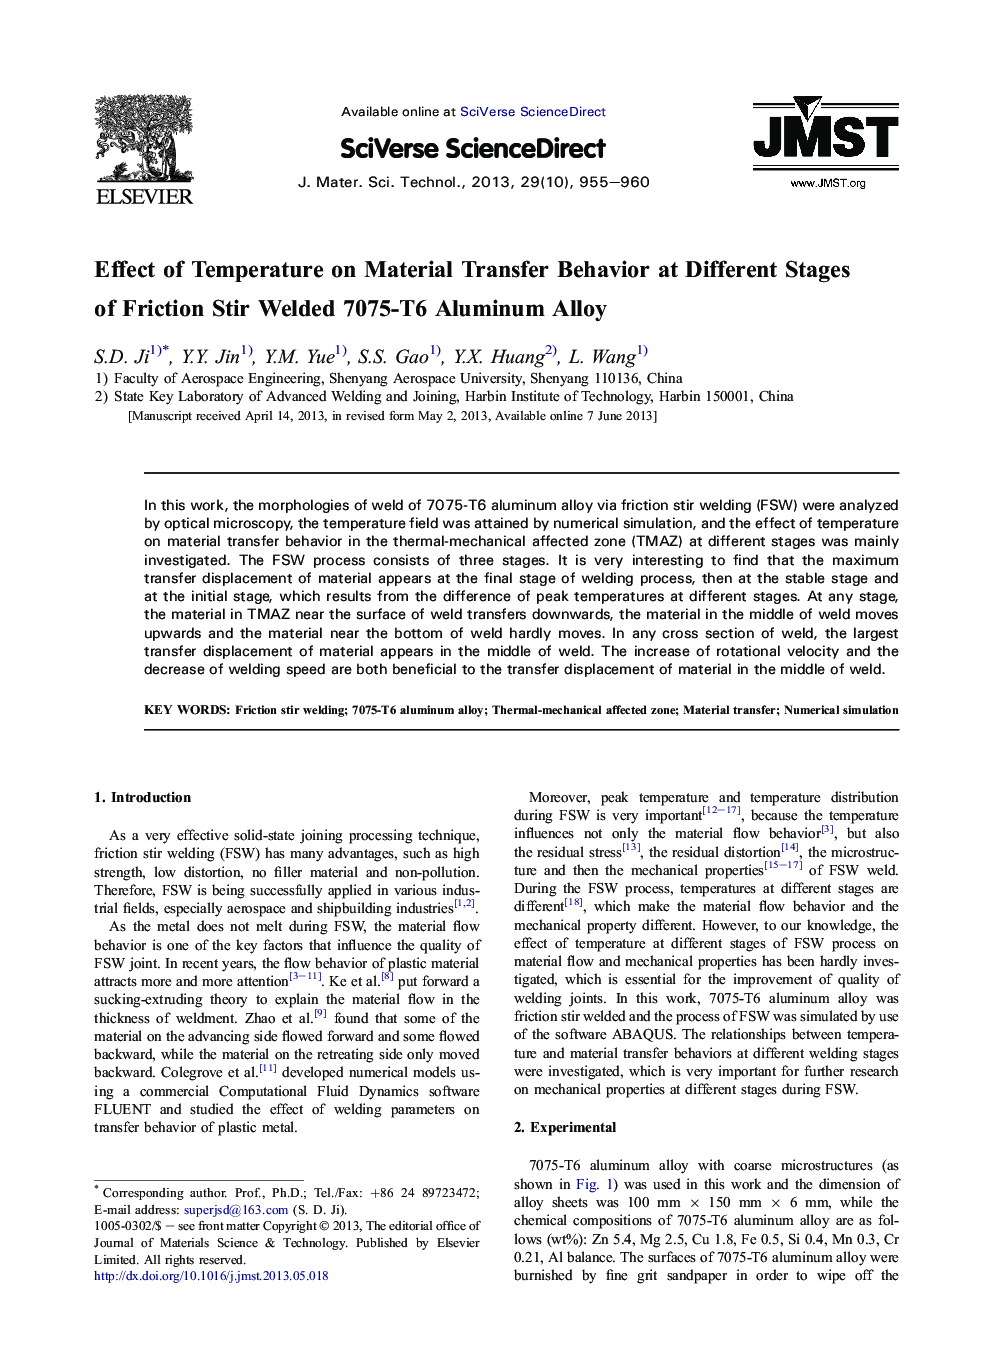 Effect of Temperature on Material Transfer Behavior at Different Stages of Friction Stir Welded 7075-T6 Aluminum Alloy